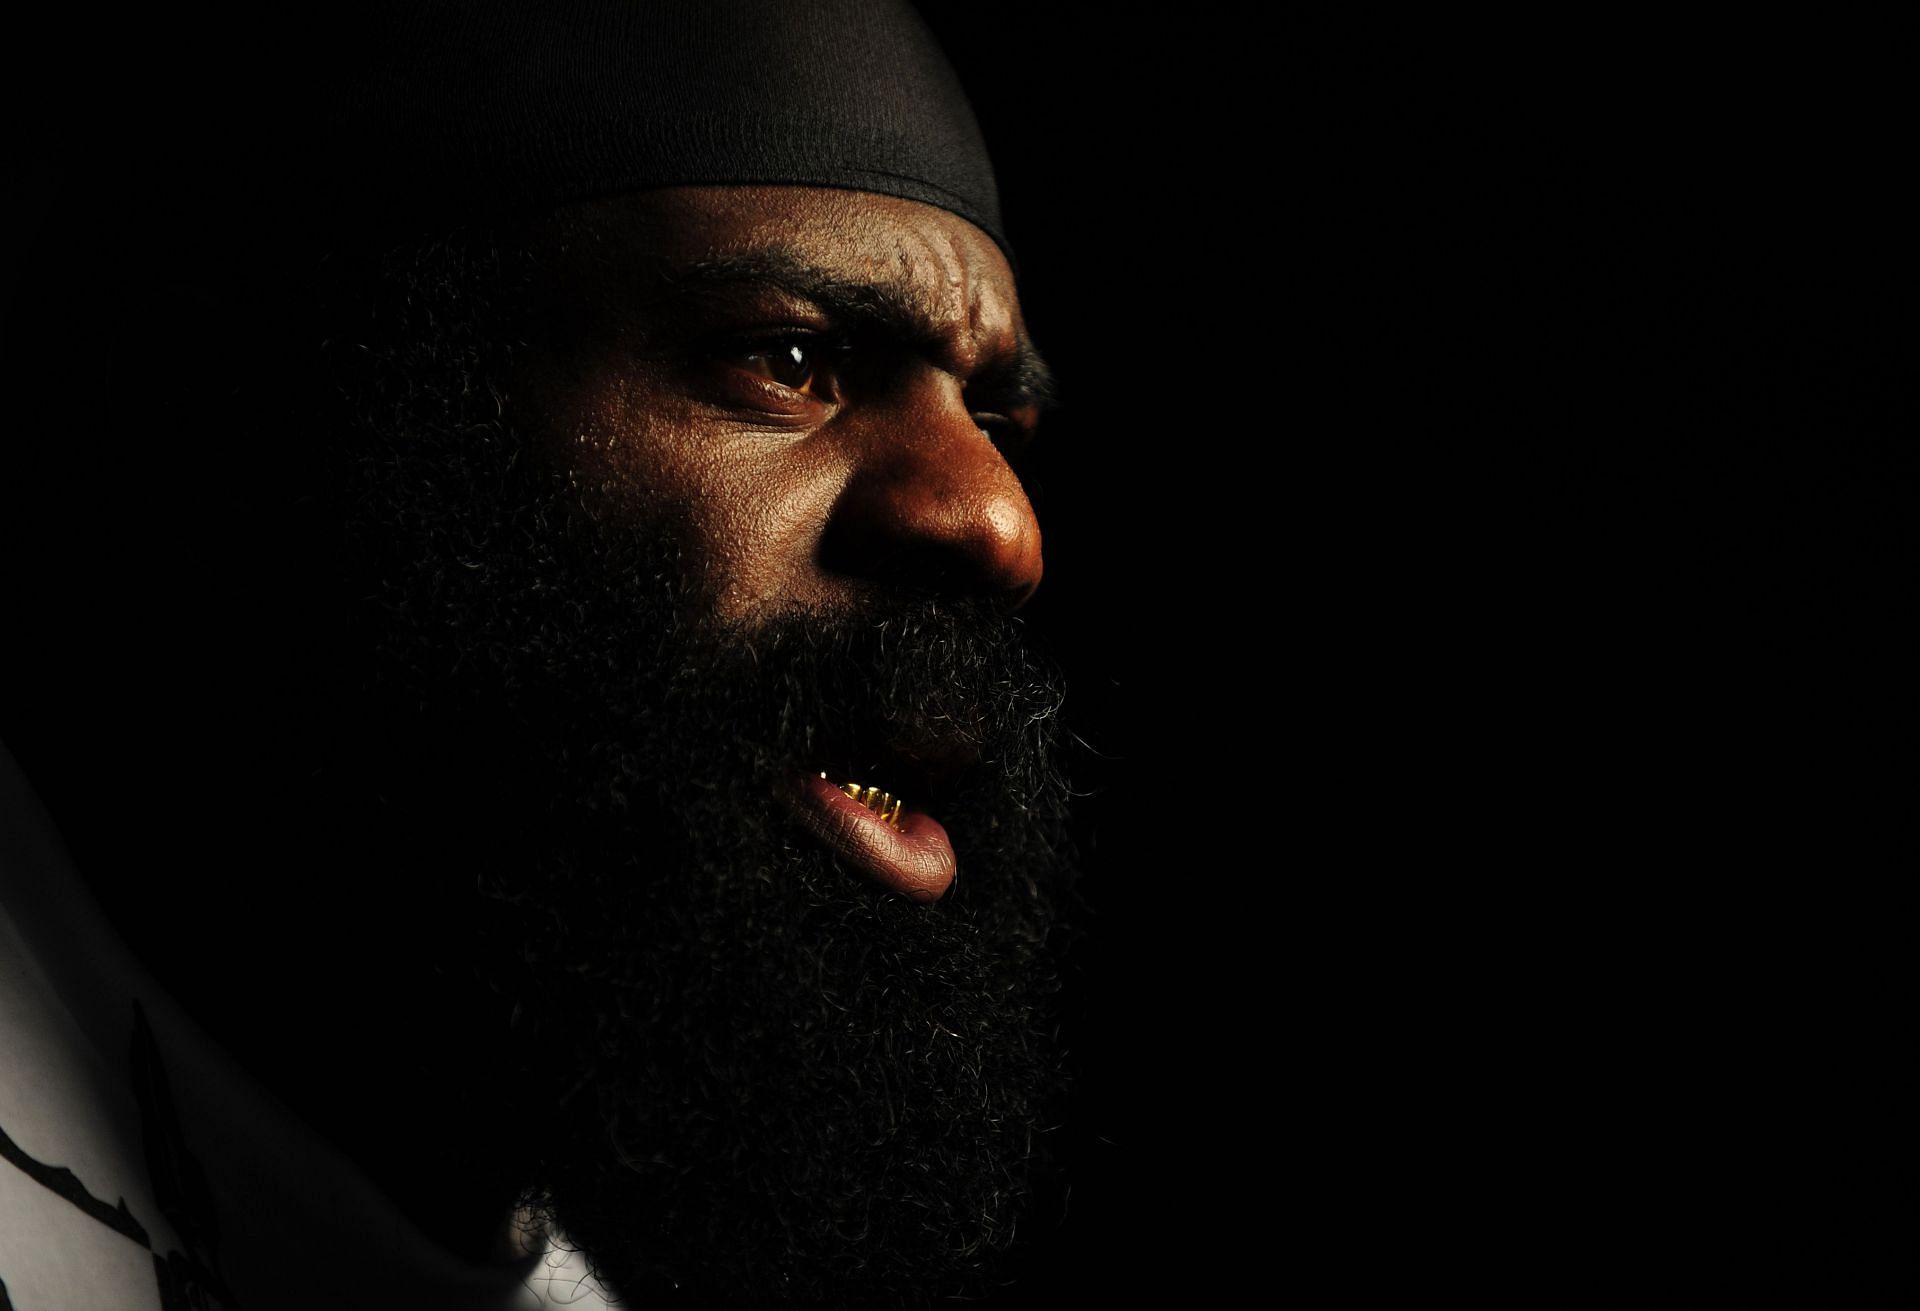 Kimbo Slice helped to build Elite XC up, but then was partly responsible for their downfall